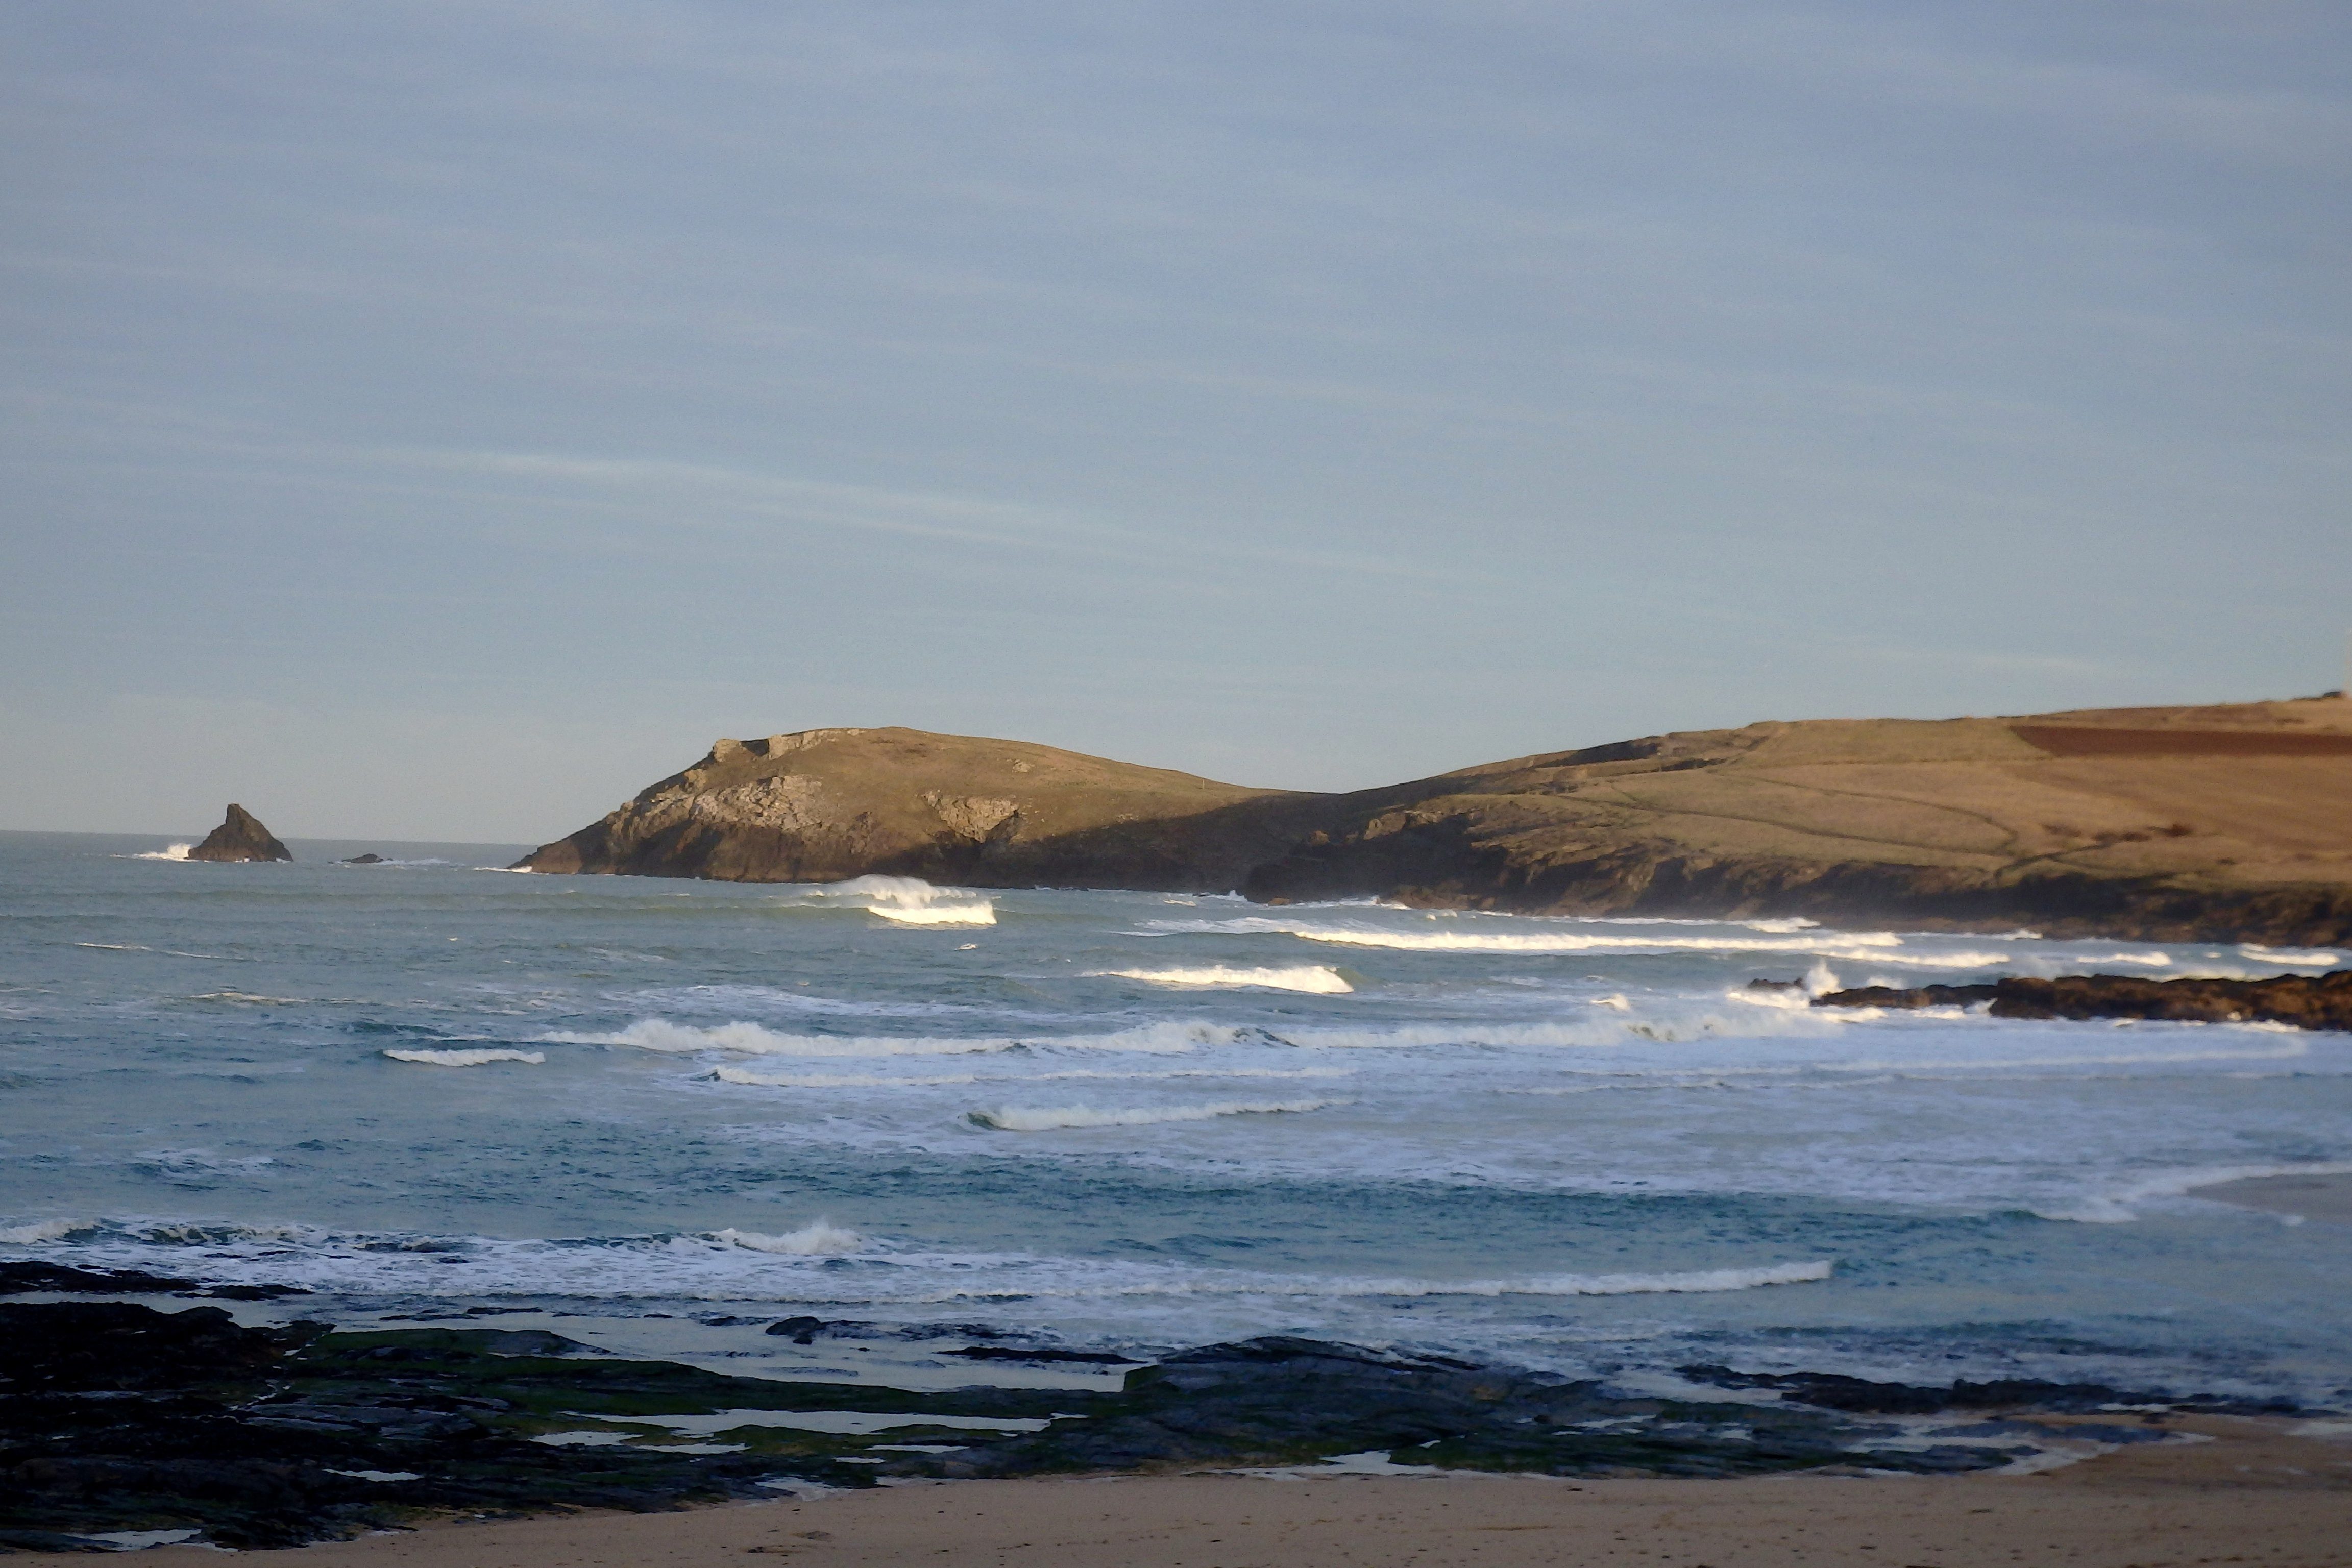 Surf Report for Tuesday 16th February 2016